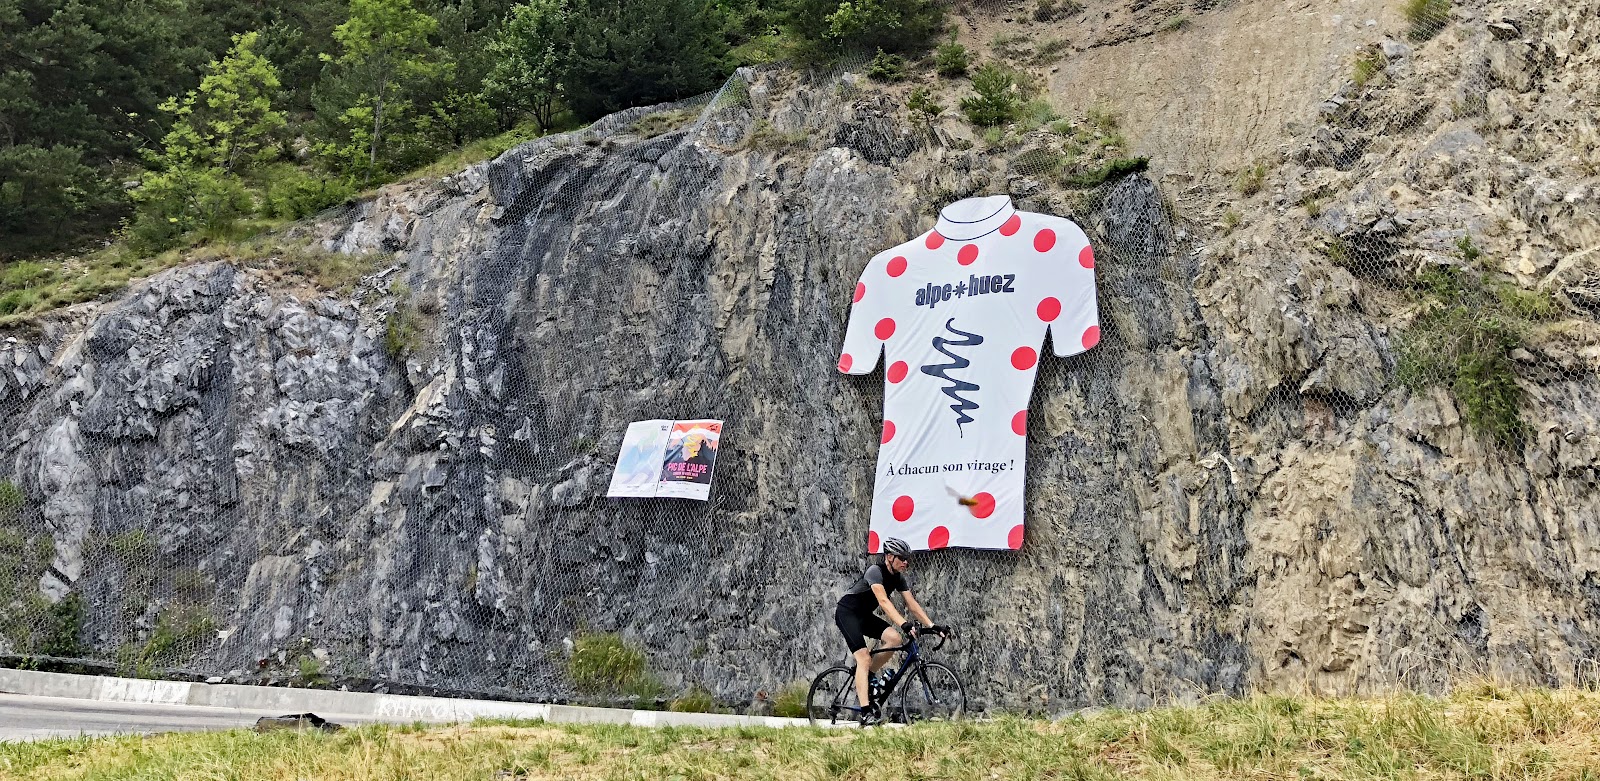 Cycling Alpe d'Huez - hairpin turn and yellow jersey on rock wall with cyclist riding past